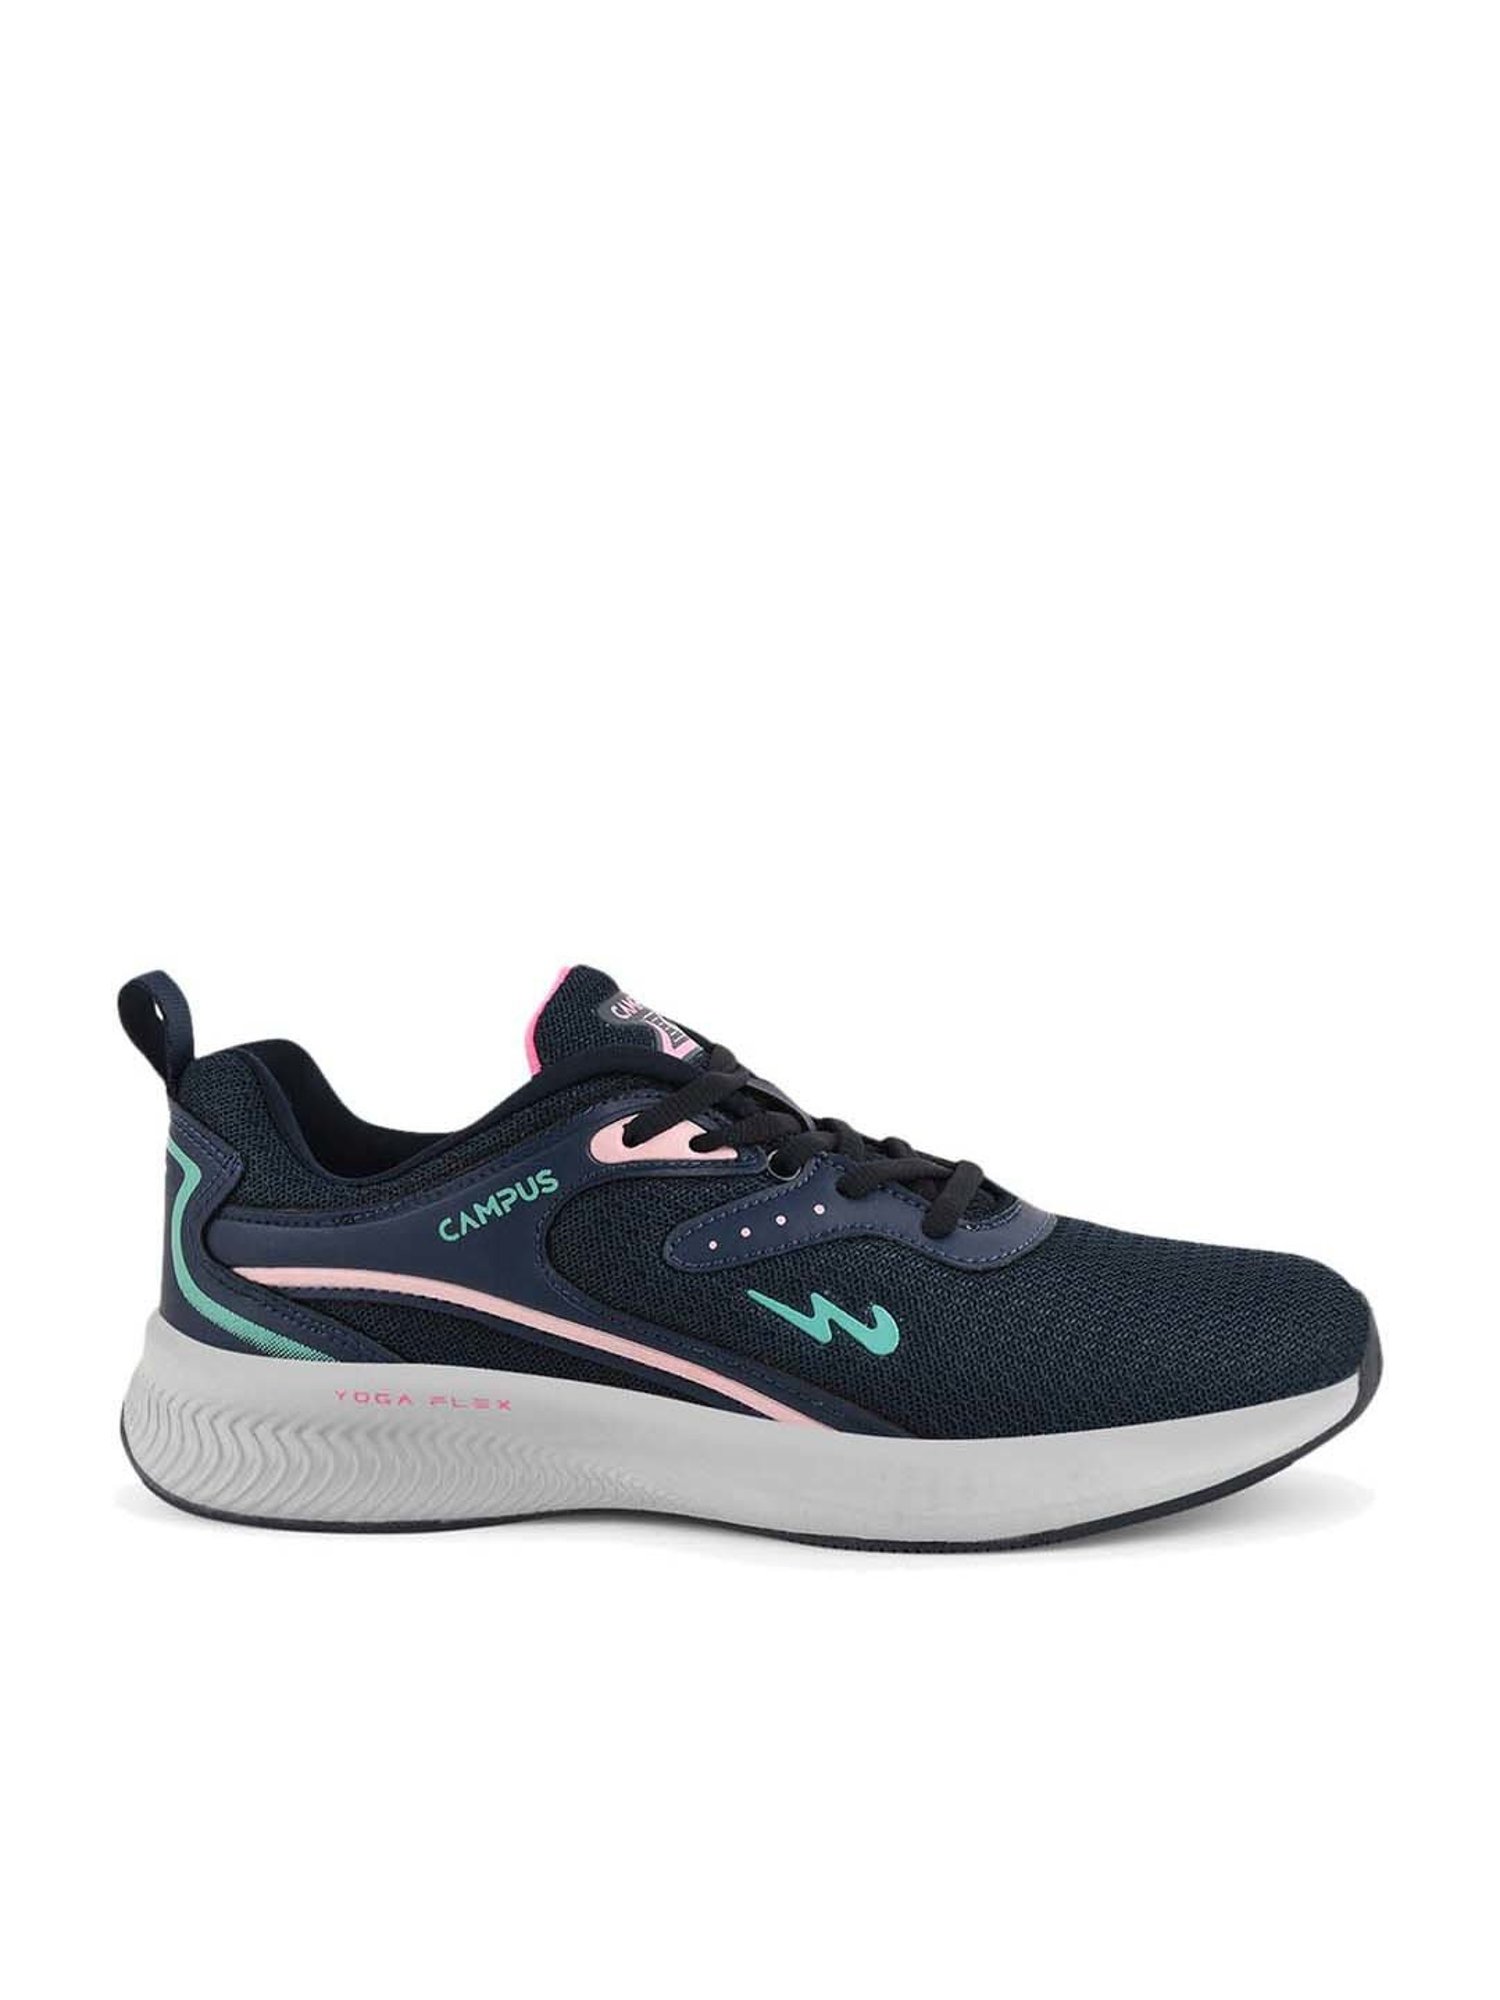 Buy Campus Women's Bliss Black Running Shoes for Women at Best Price @ Tata  CLiQ